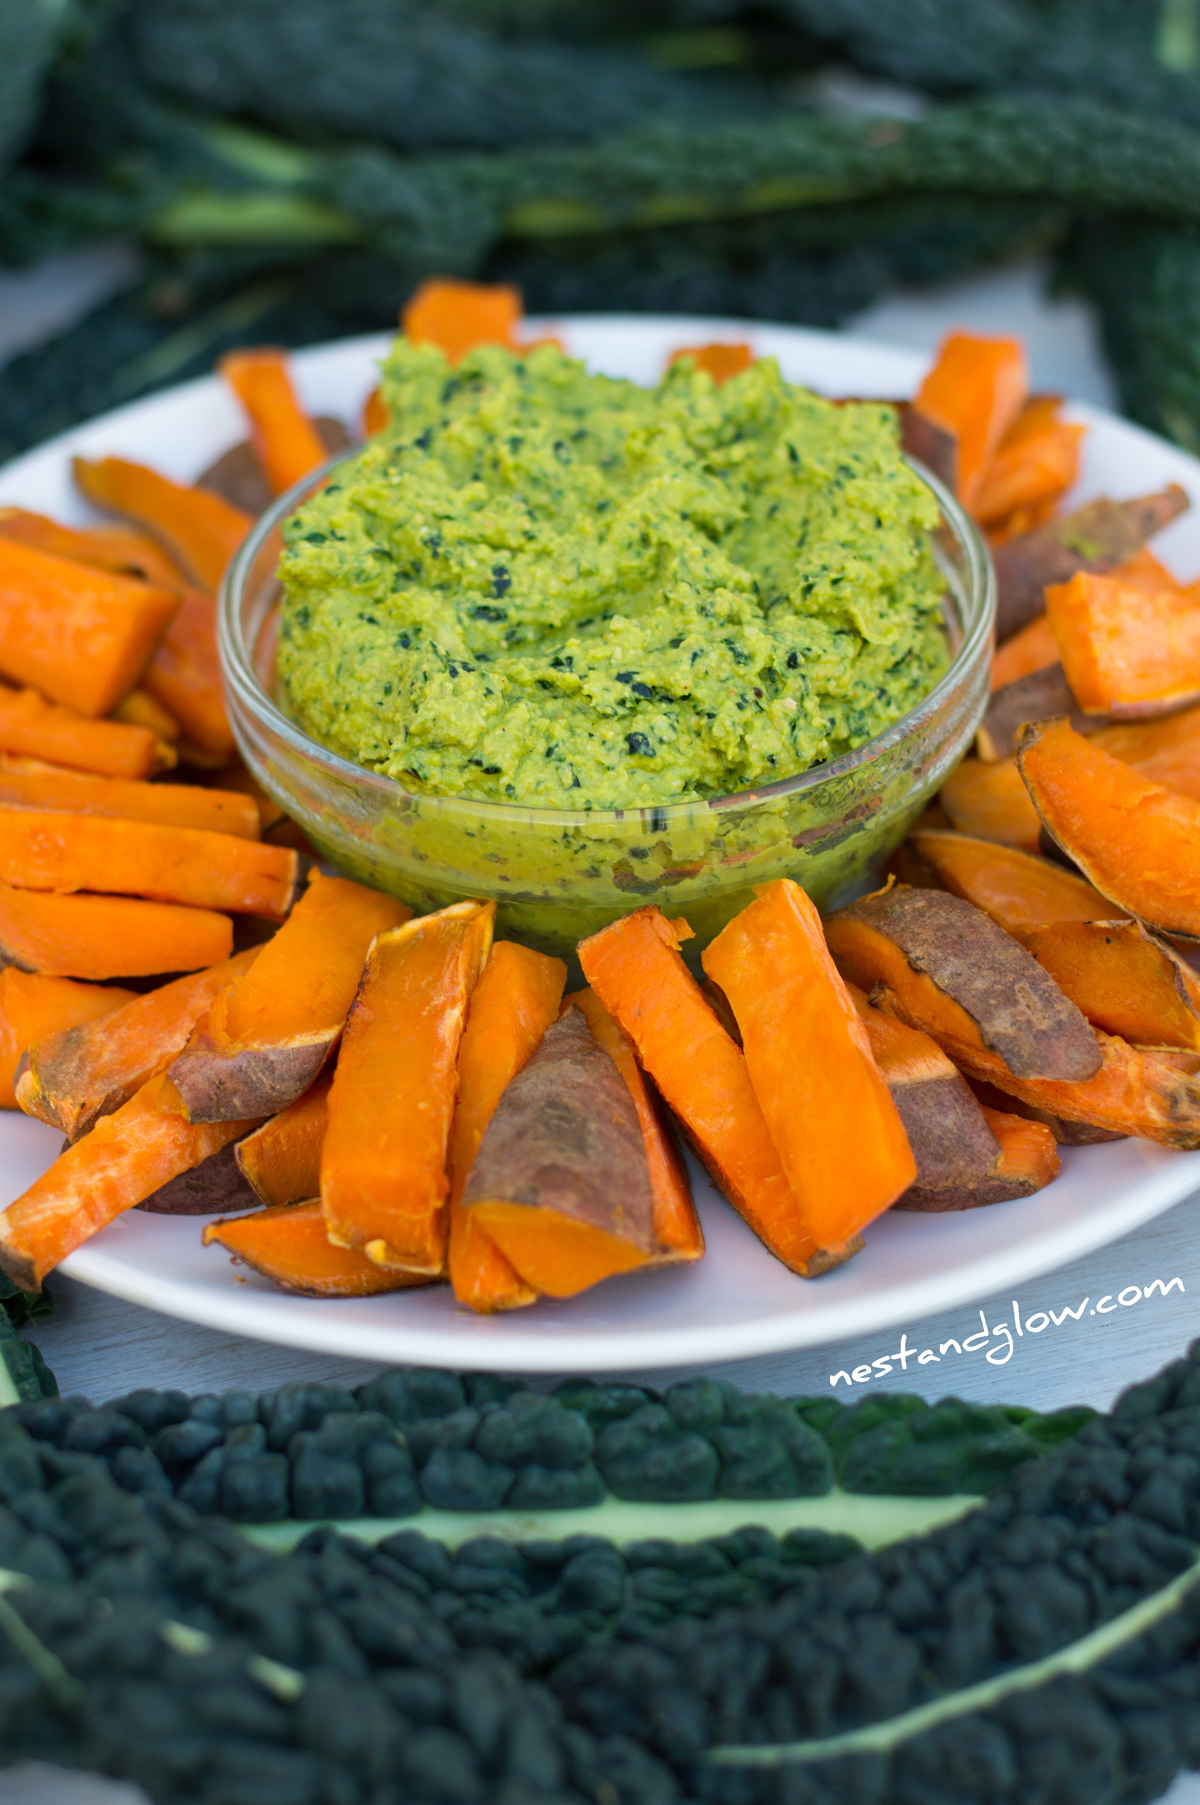 Kale Hummus and Baked Sweet Potato Chips Recipe - Easy and Healthy